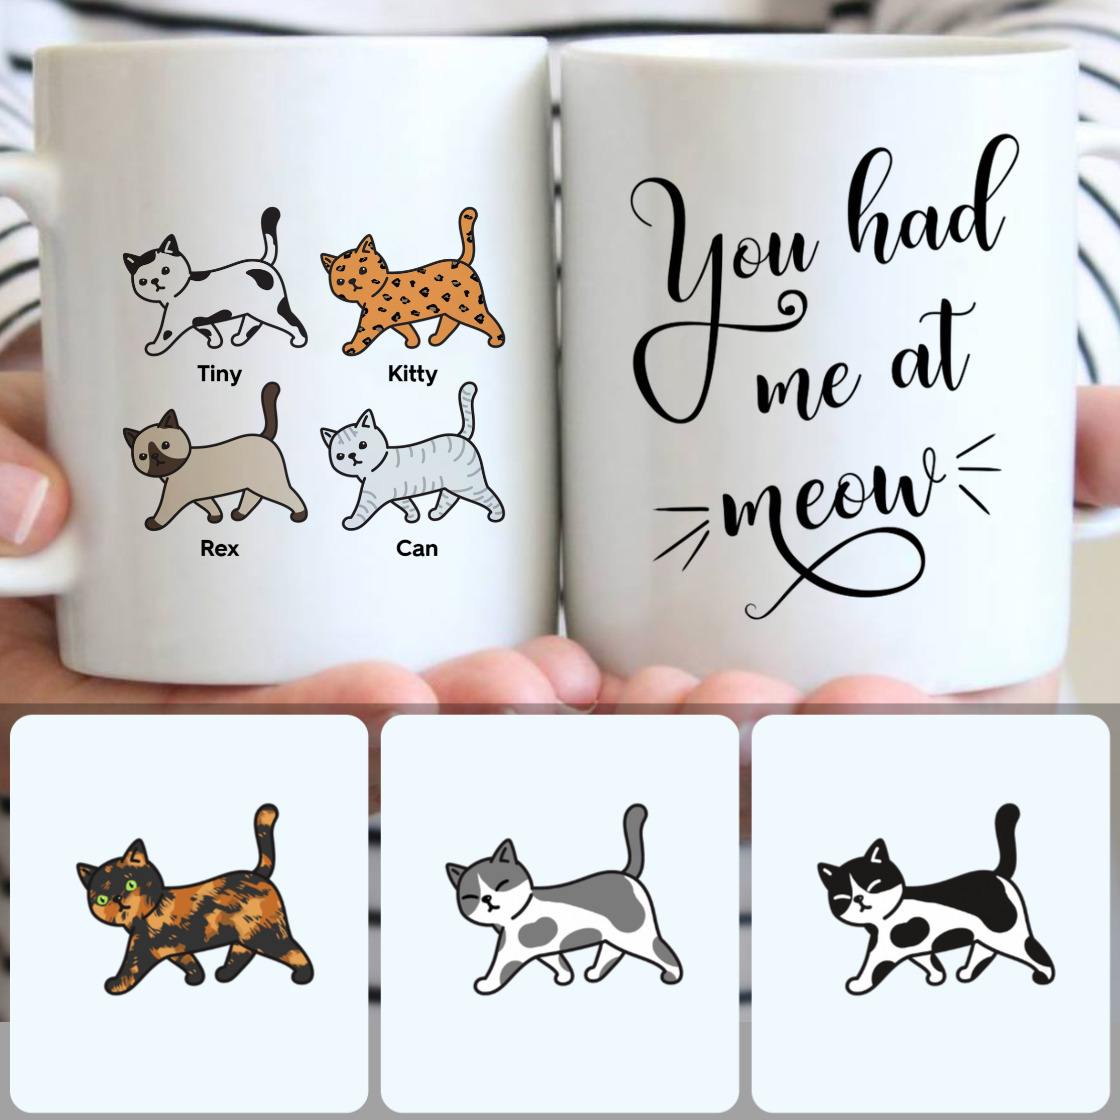 Personalized Mug, Surprise Birthday Gifts, 4 Cats Customized Coffee Mug With Names